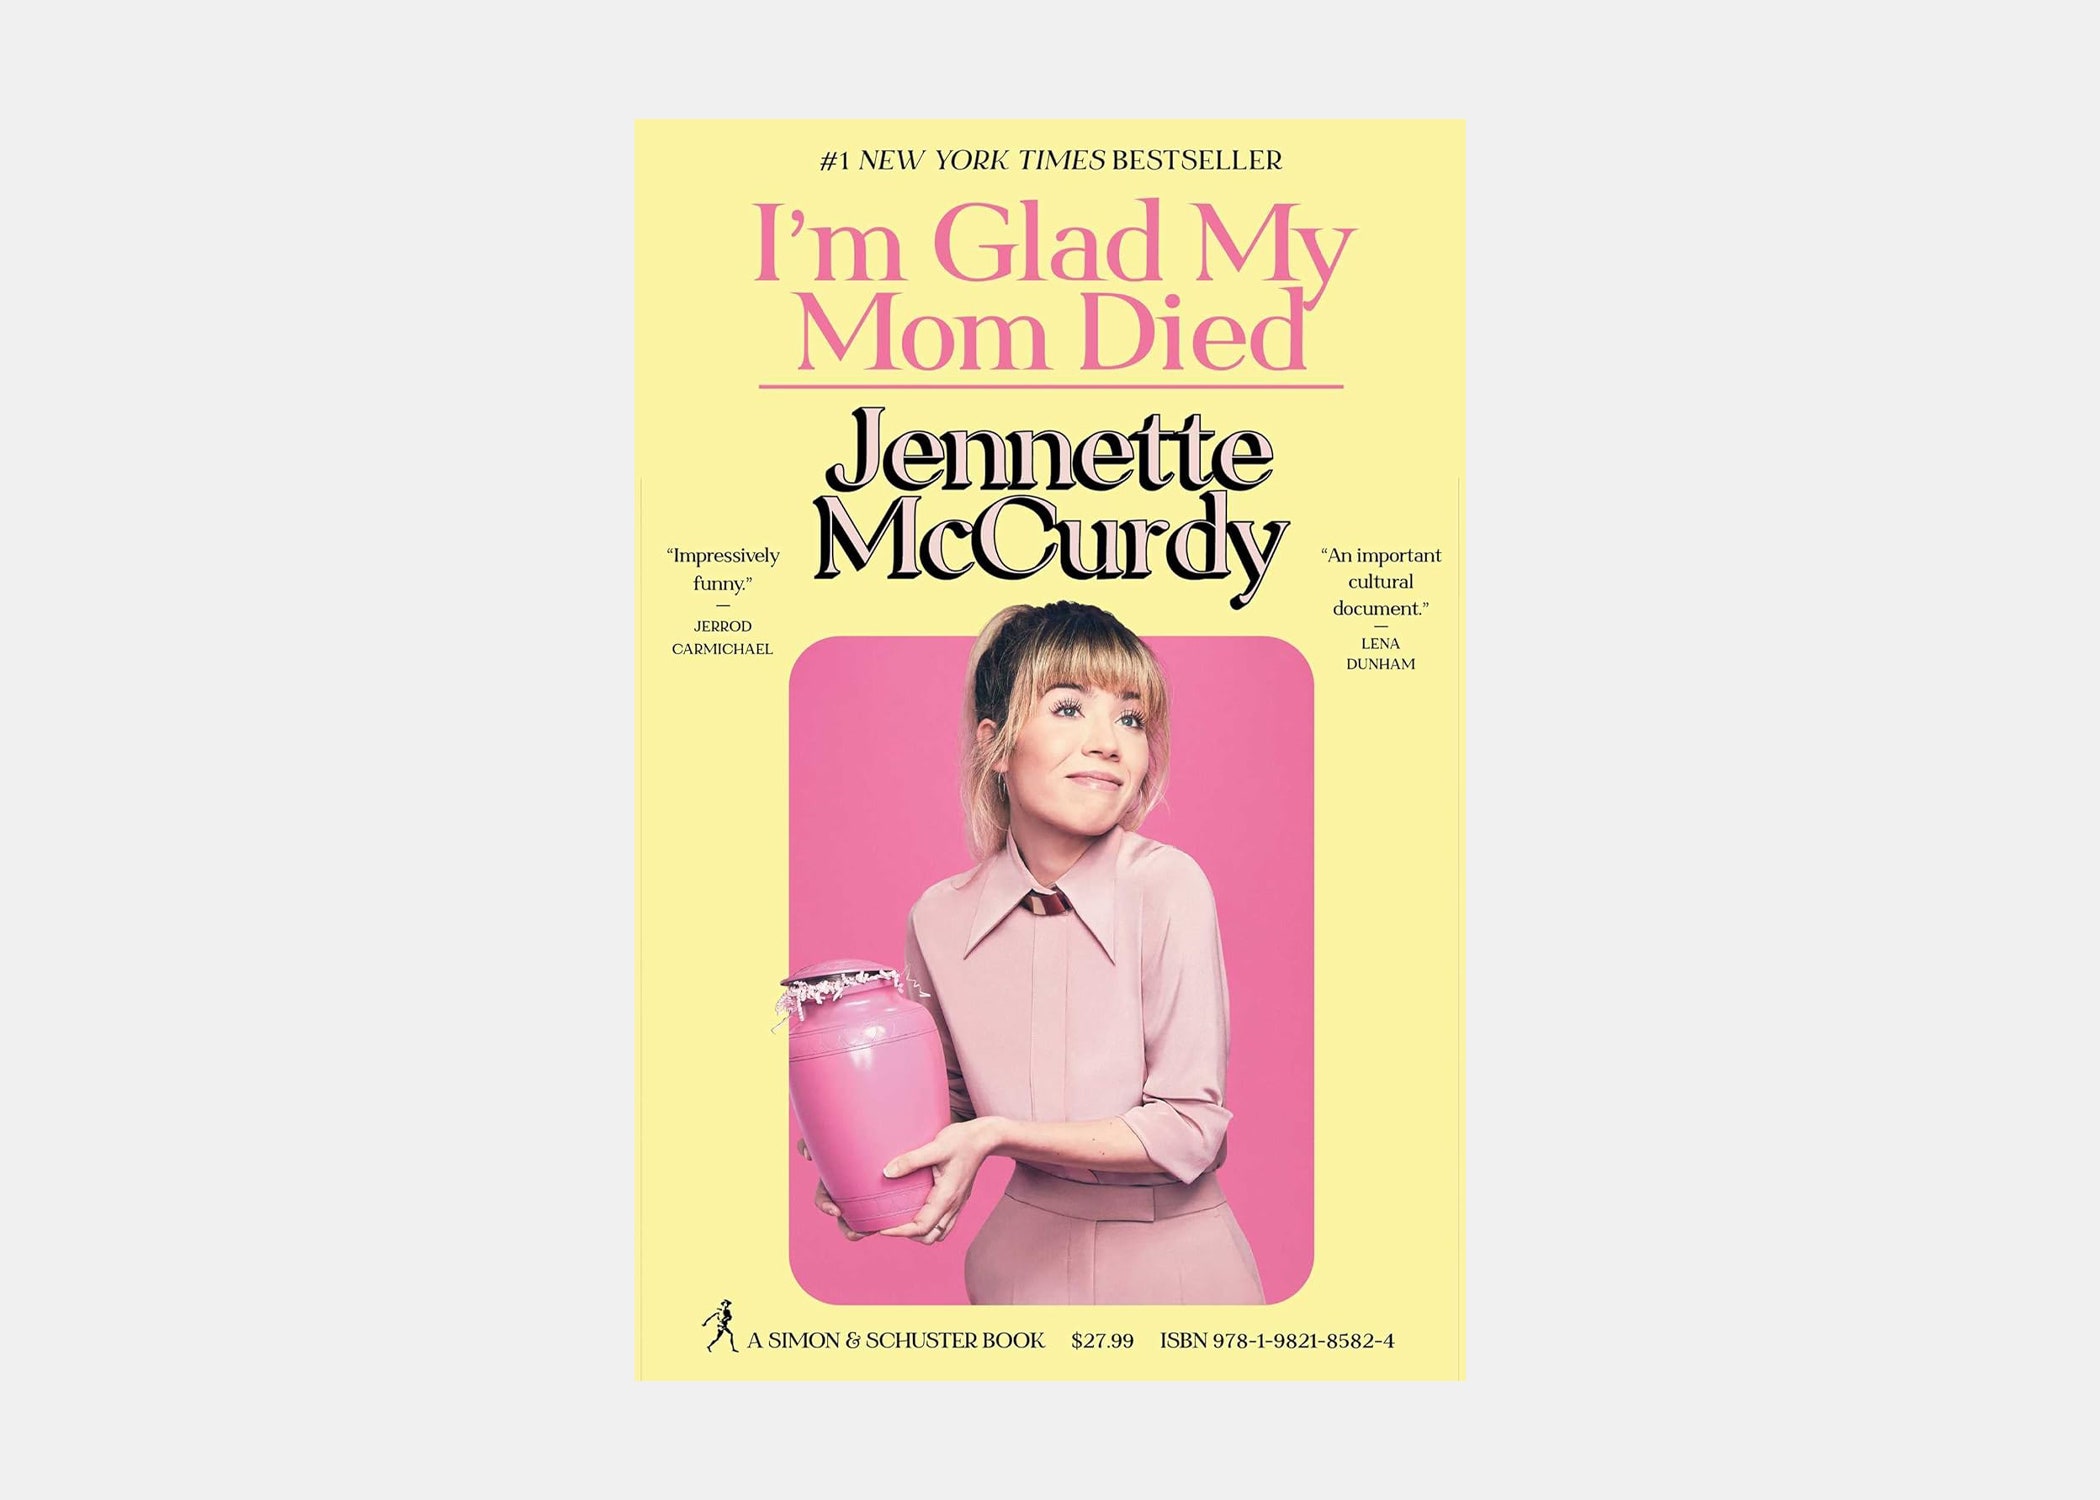 <p>Jennette McCurdy initially captured our hearts on the early 2000s hit television show <em>iCarly,</em> but has since gained significant praise for her memoir, <em>I’m Glad My Mom Died.</em> Recounting her upbringing and struggles to overcome past traumas, the book has spent over 52 weeks on the <em>New York Times</em> nonfiction bestseller list and won the 2022 Goodreads Choice Award for best memoir. McCurdy’s writing is beautiful, engaging, and chilling.</p> <p><strong>Page count:</strong> 320</p> <p><strong>Average read time:</strong> 3 hours and 35 minutes</p> $20, Amazon. <a href="https://www.amazon.com/Im-Glad-My-Mom-Died/dp/1982185821">Get it now!</a><p>Sign up to receive the latest news, expert tips, and inspiration on all things travel</p><a href="https://www.cntraveler.com/newsletter/the-daily?sourceCode=msnsend">Inspire Me</a>